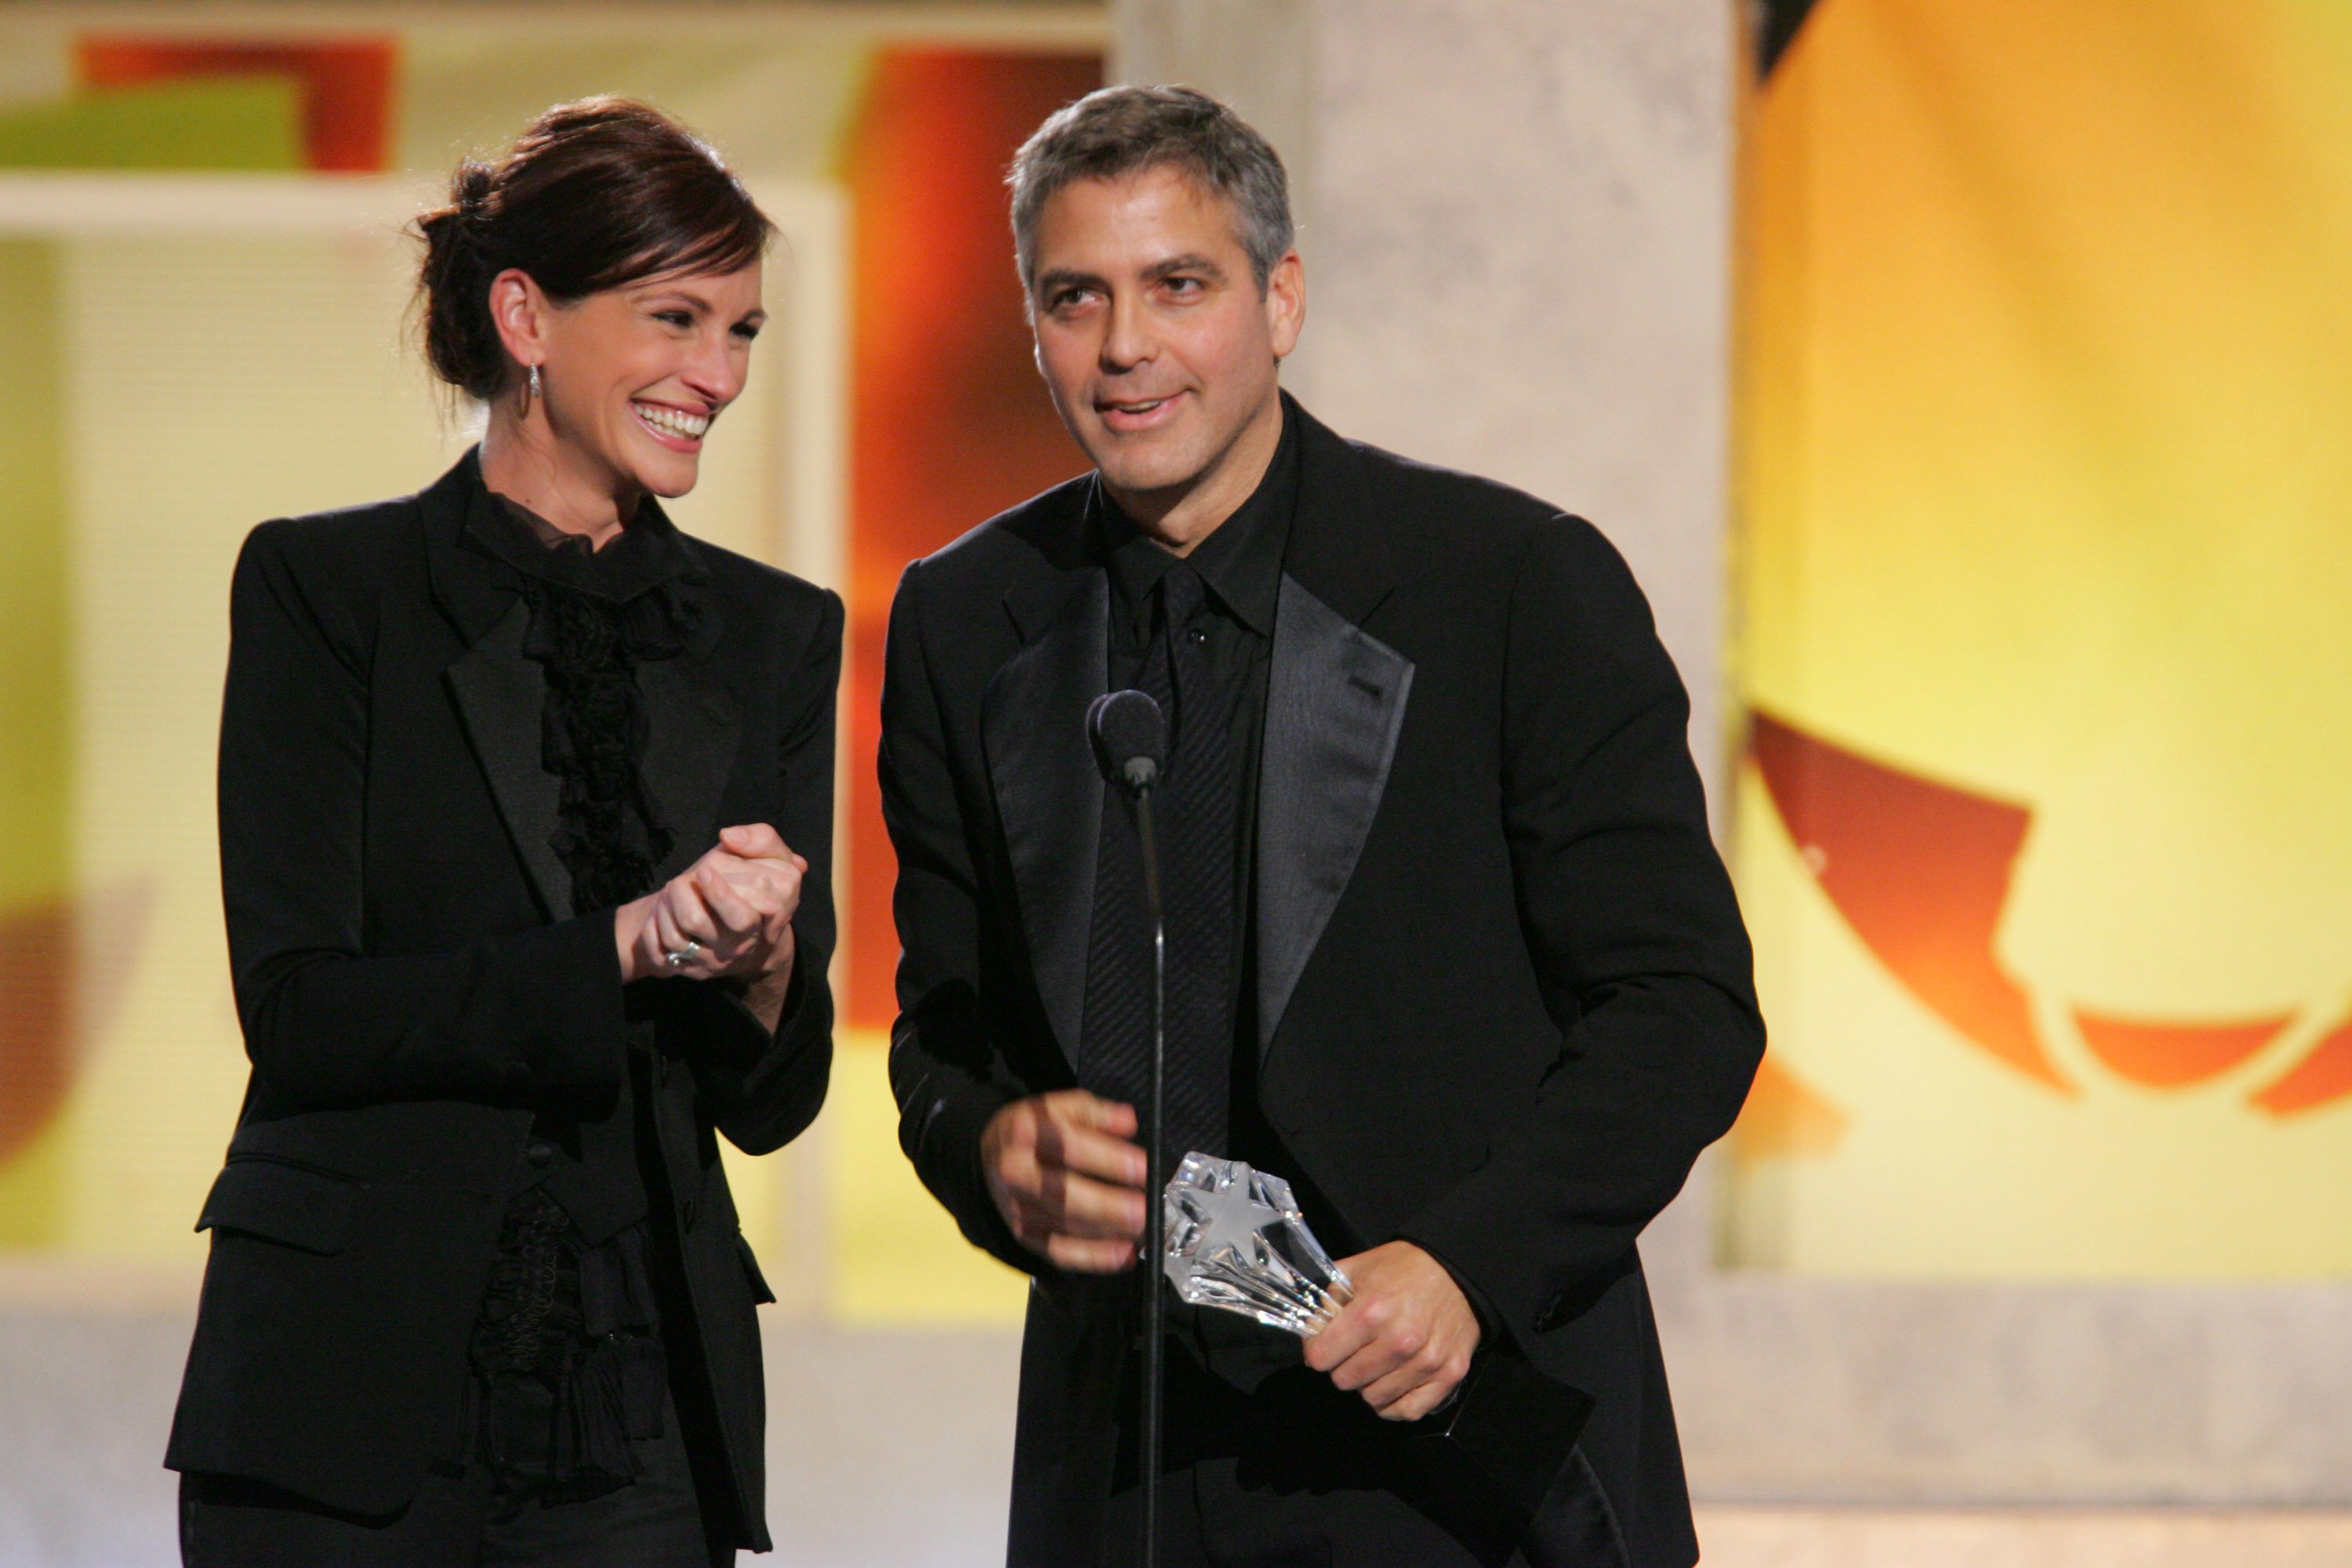 George Clooney (R), winner of the Freedom Award, with presenter Julia Roberts at the Santa Monica Civic Auditorium in Santa Monica, California. | Source: Getty Images